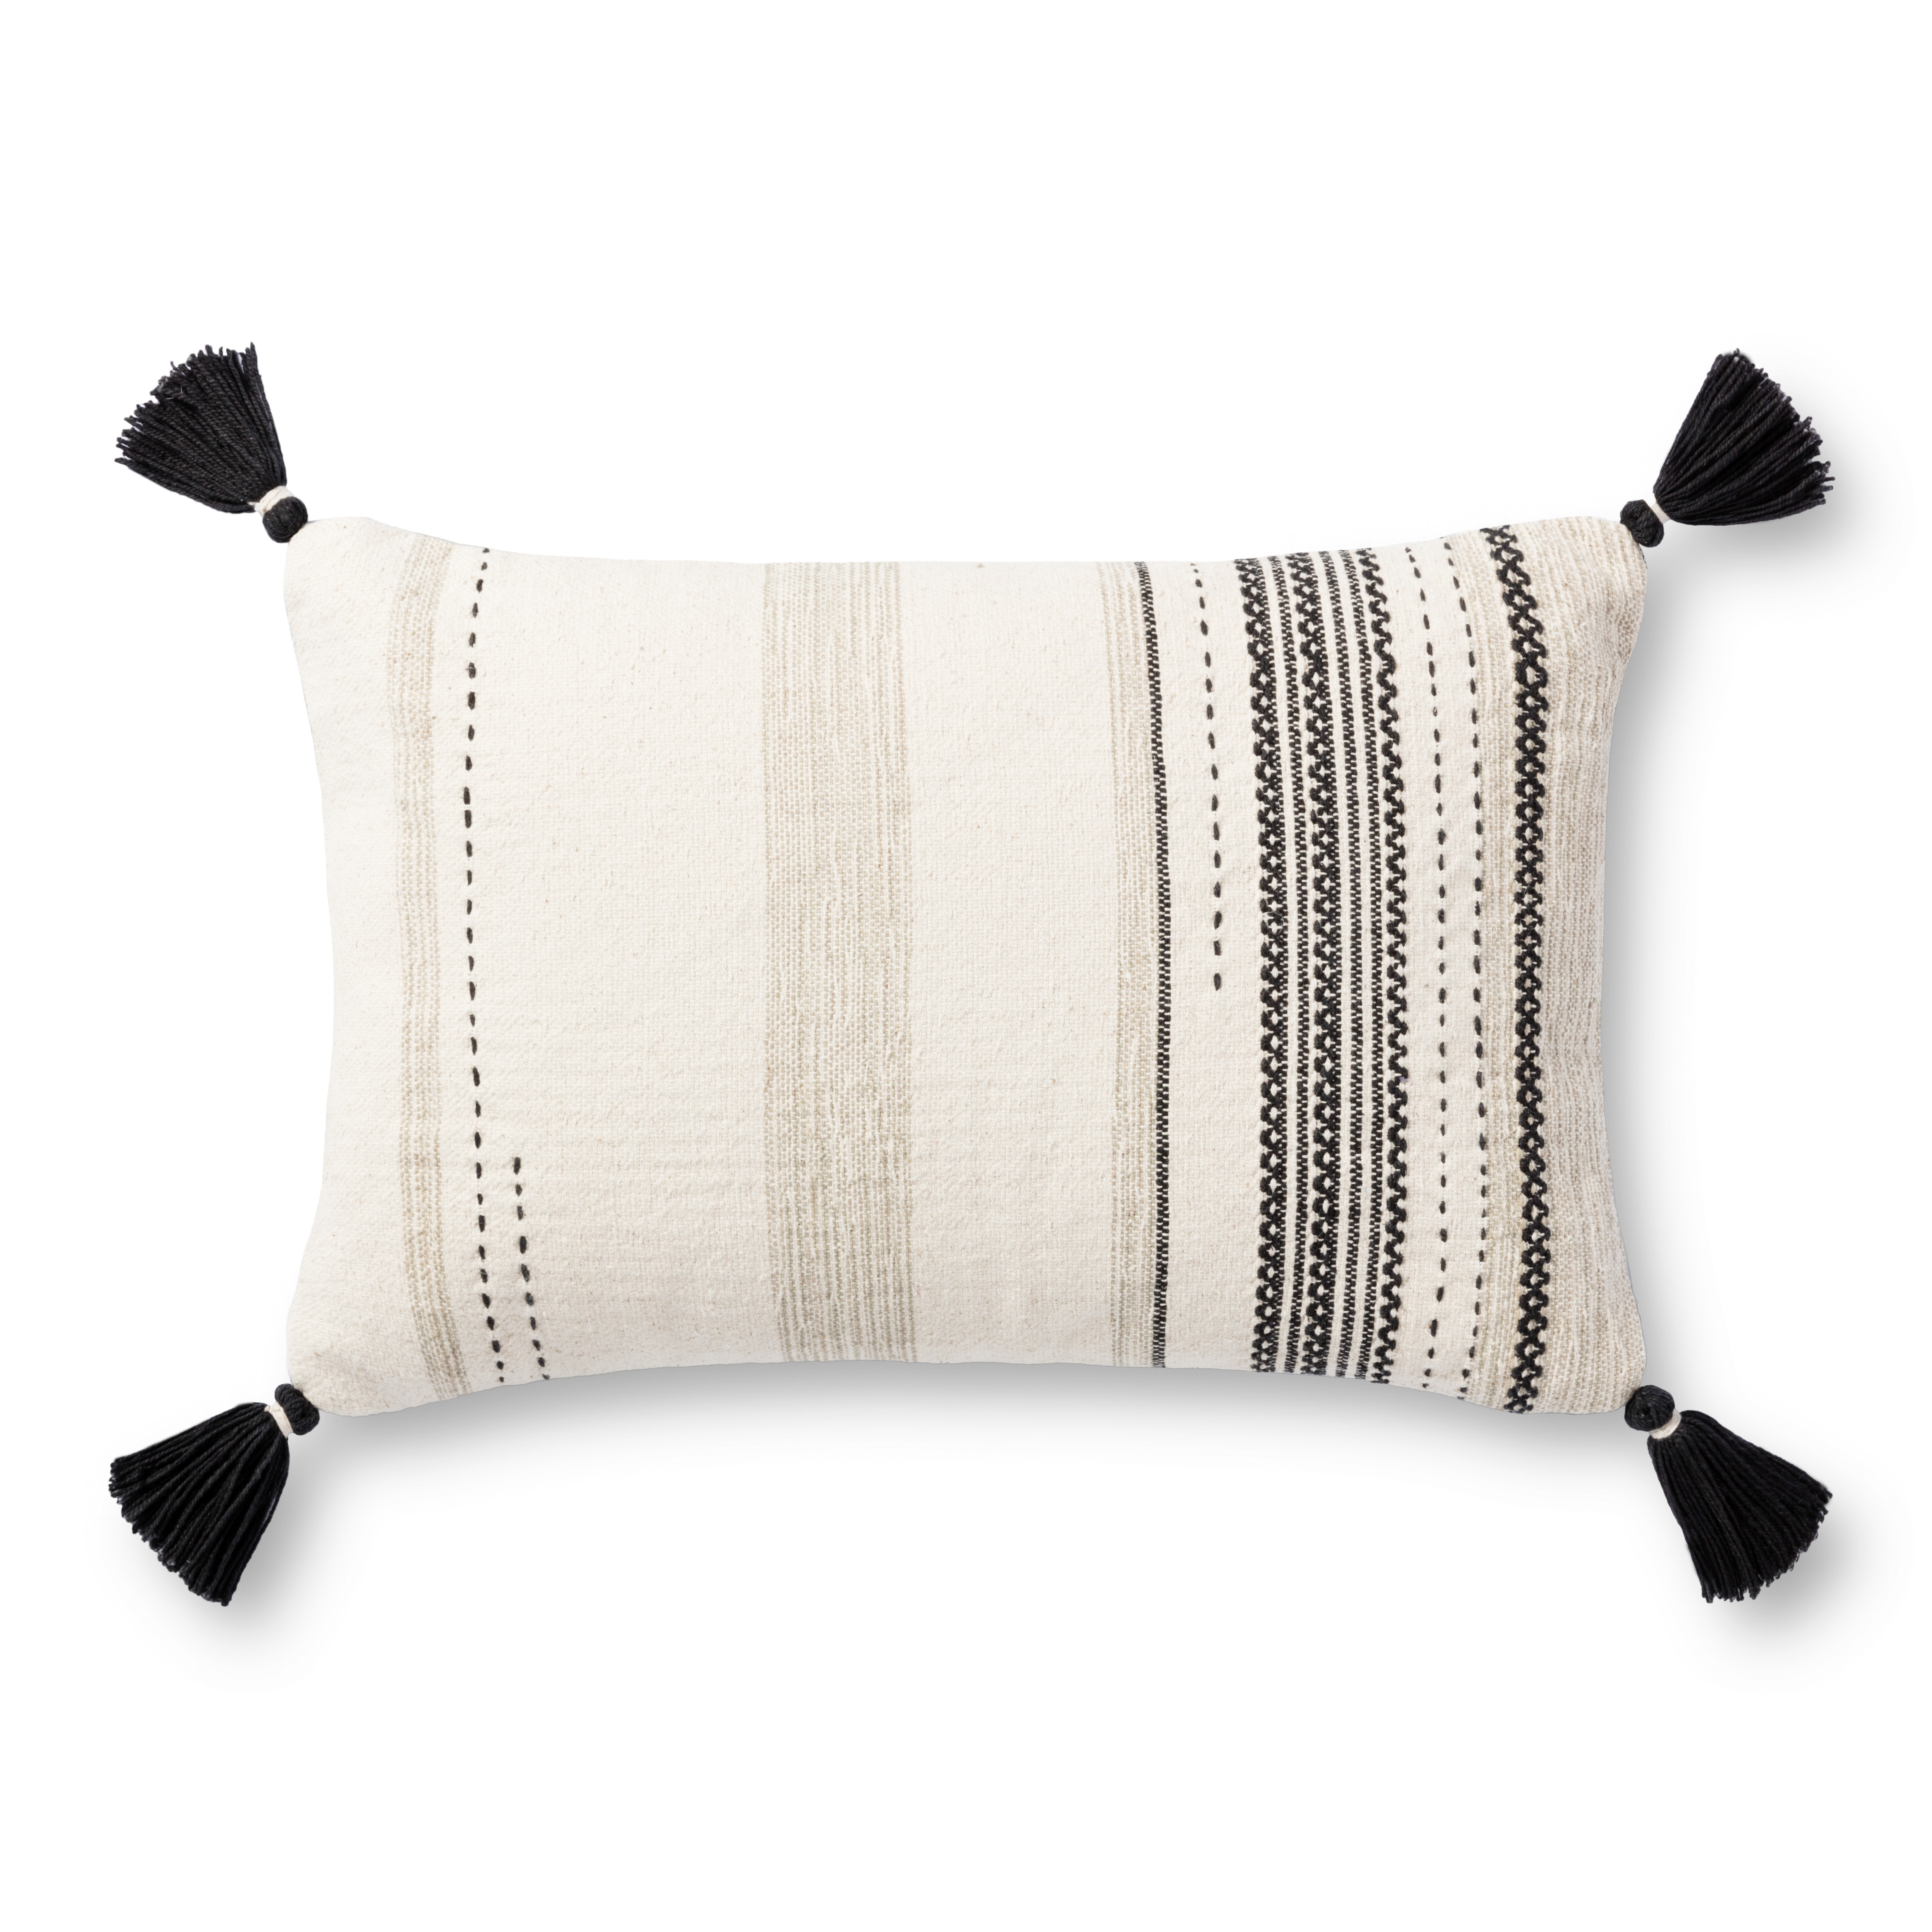 PILLOWS P1151 NATURAL / BLACK 13" x 21" Cover w/Poly - Magnolia Home by Joana Gaines Crafted by Loloi Rugs